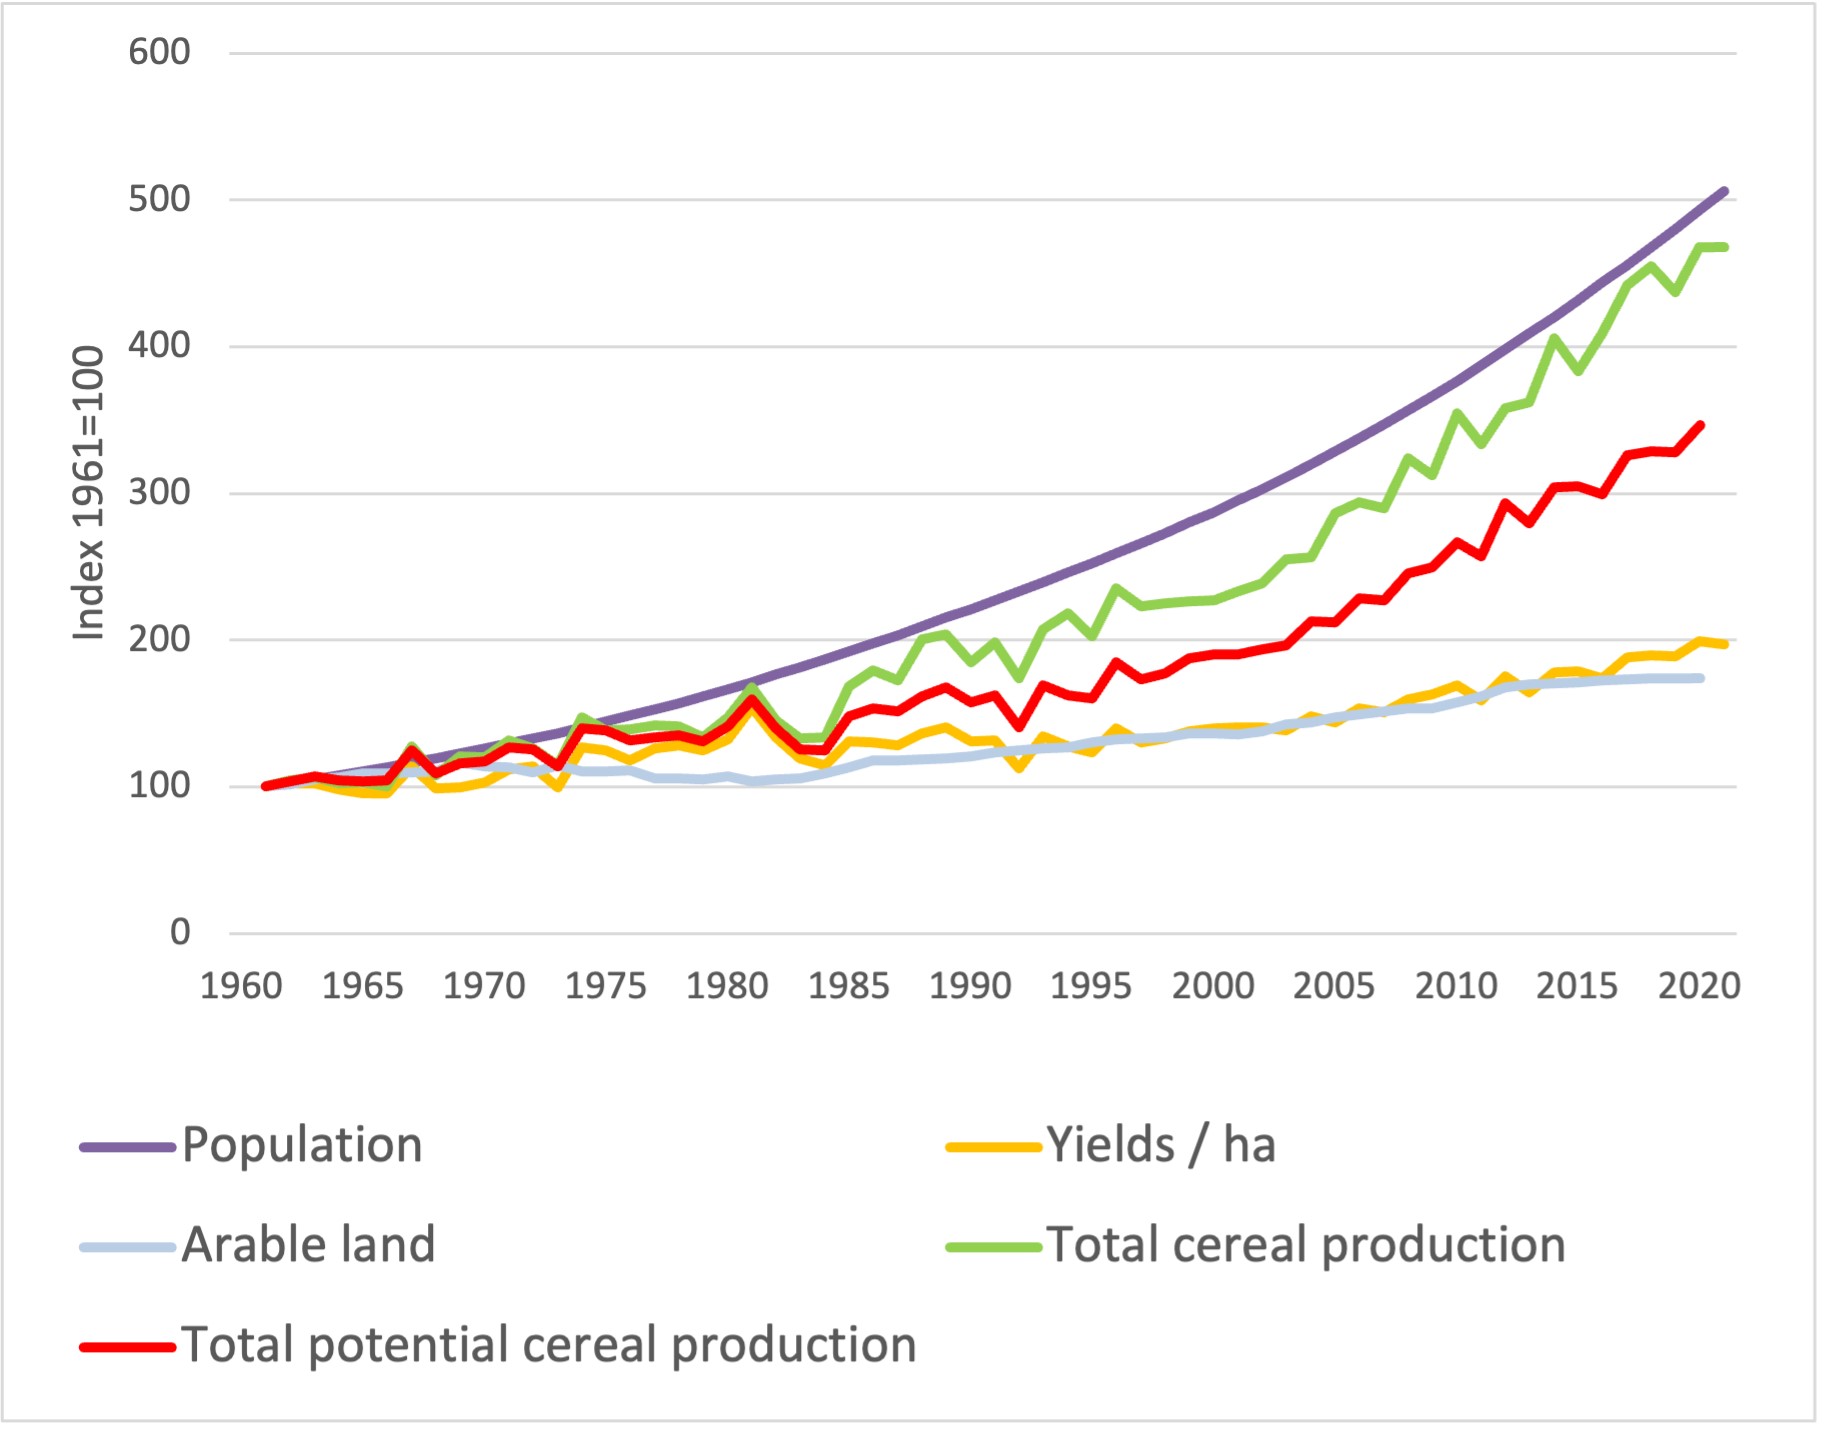 Figure 1 Index population, total cereal production, yield in cereal equivalents, yield per hectare and area of agricultural land in SSA (excluding South Africa) (1961=100).